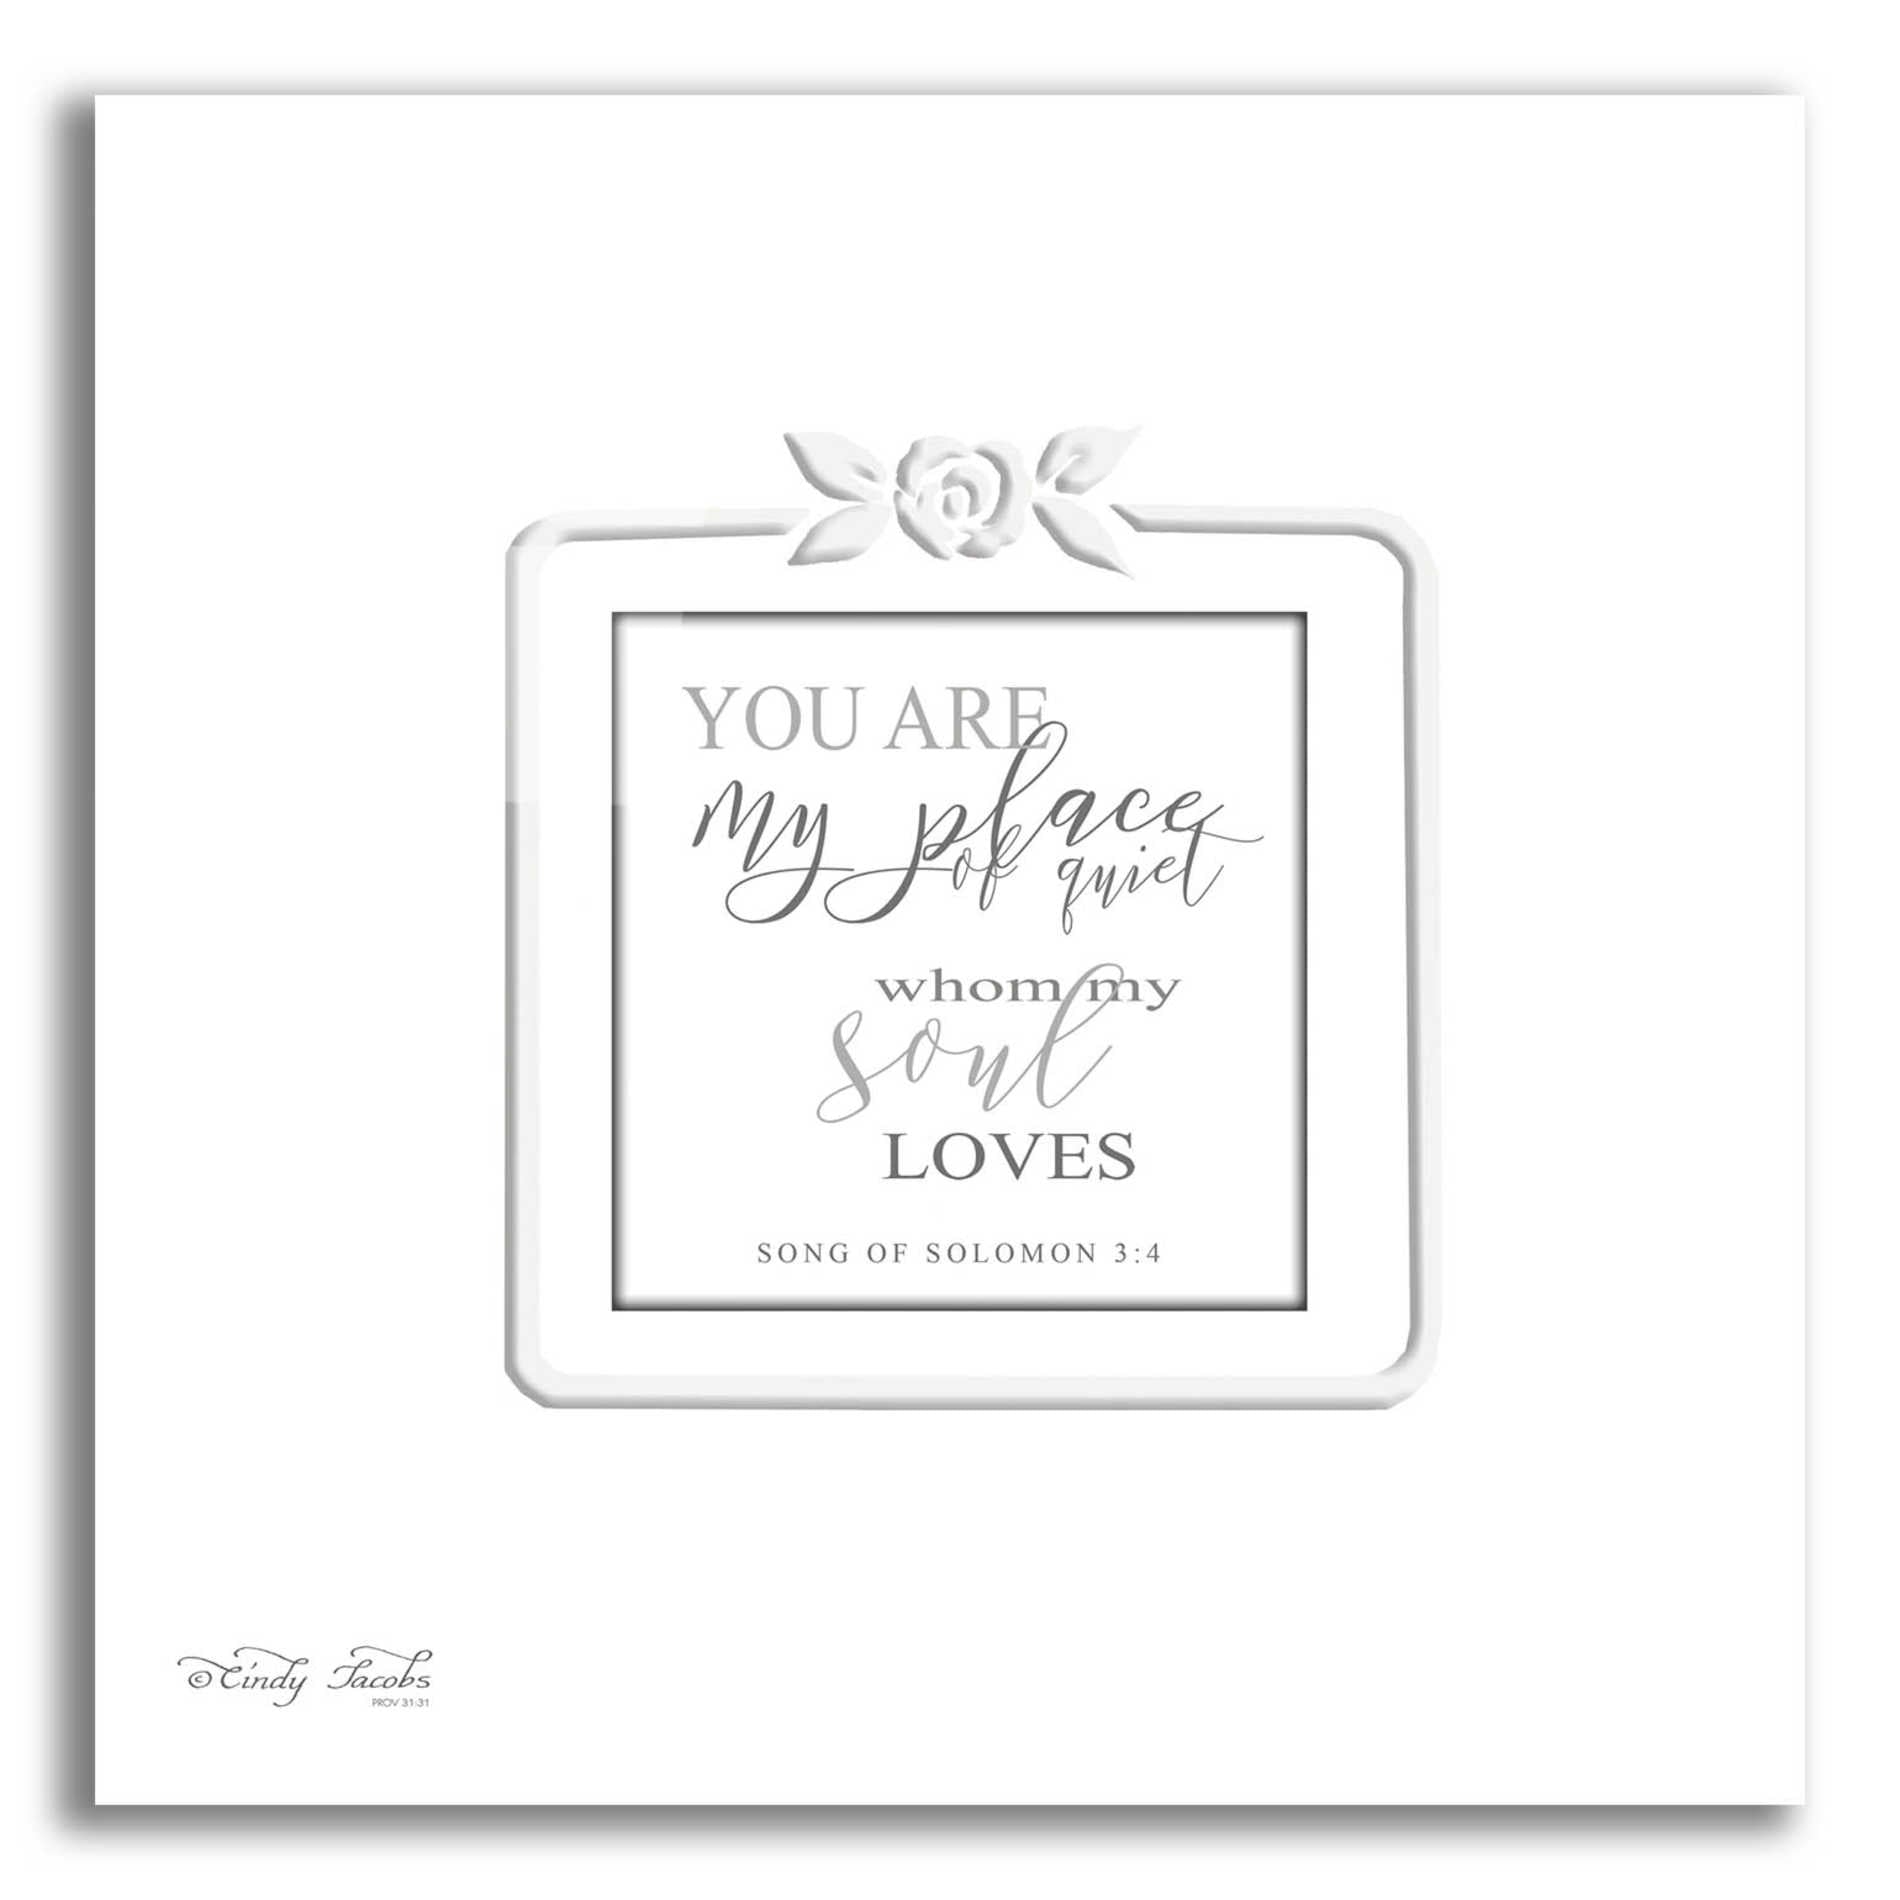 Epic Art 'My Soul Loves' by Cindy Jacobs, Acrylic Glass Wall Art,12x12